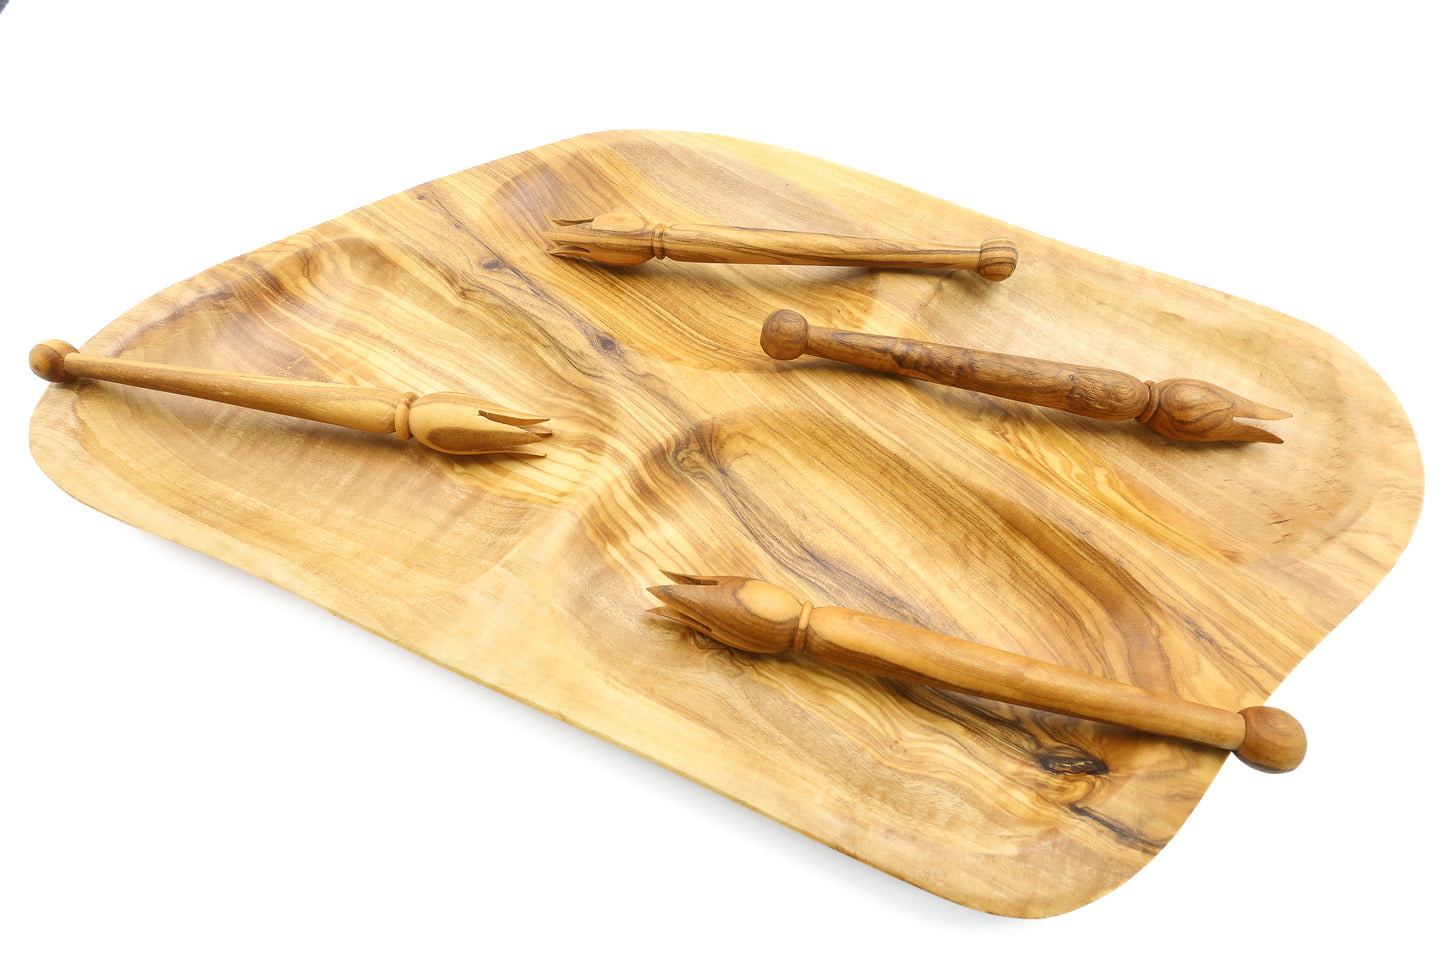 Rustic charm in your appetizer presentation with an irregular olive wood tray